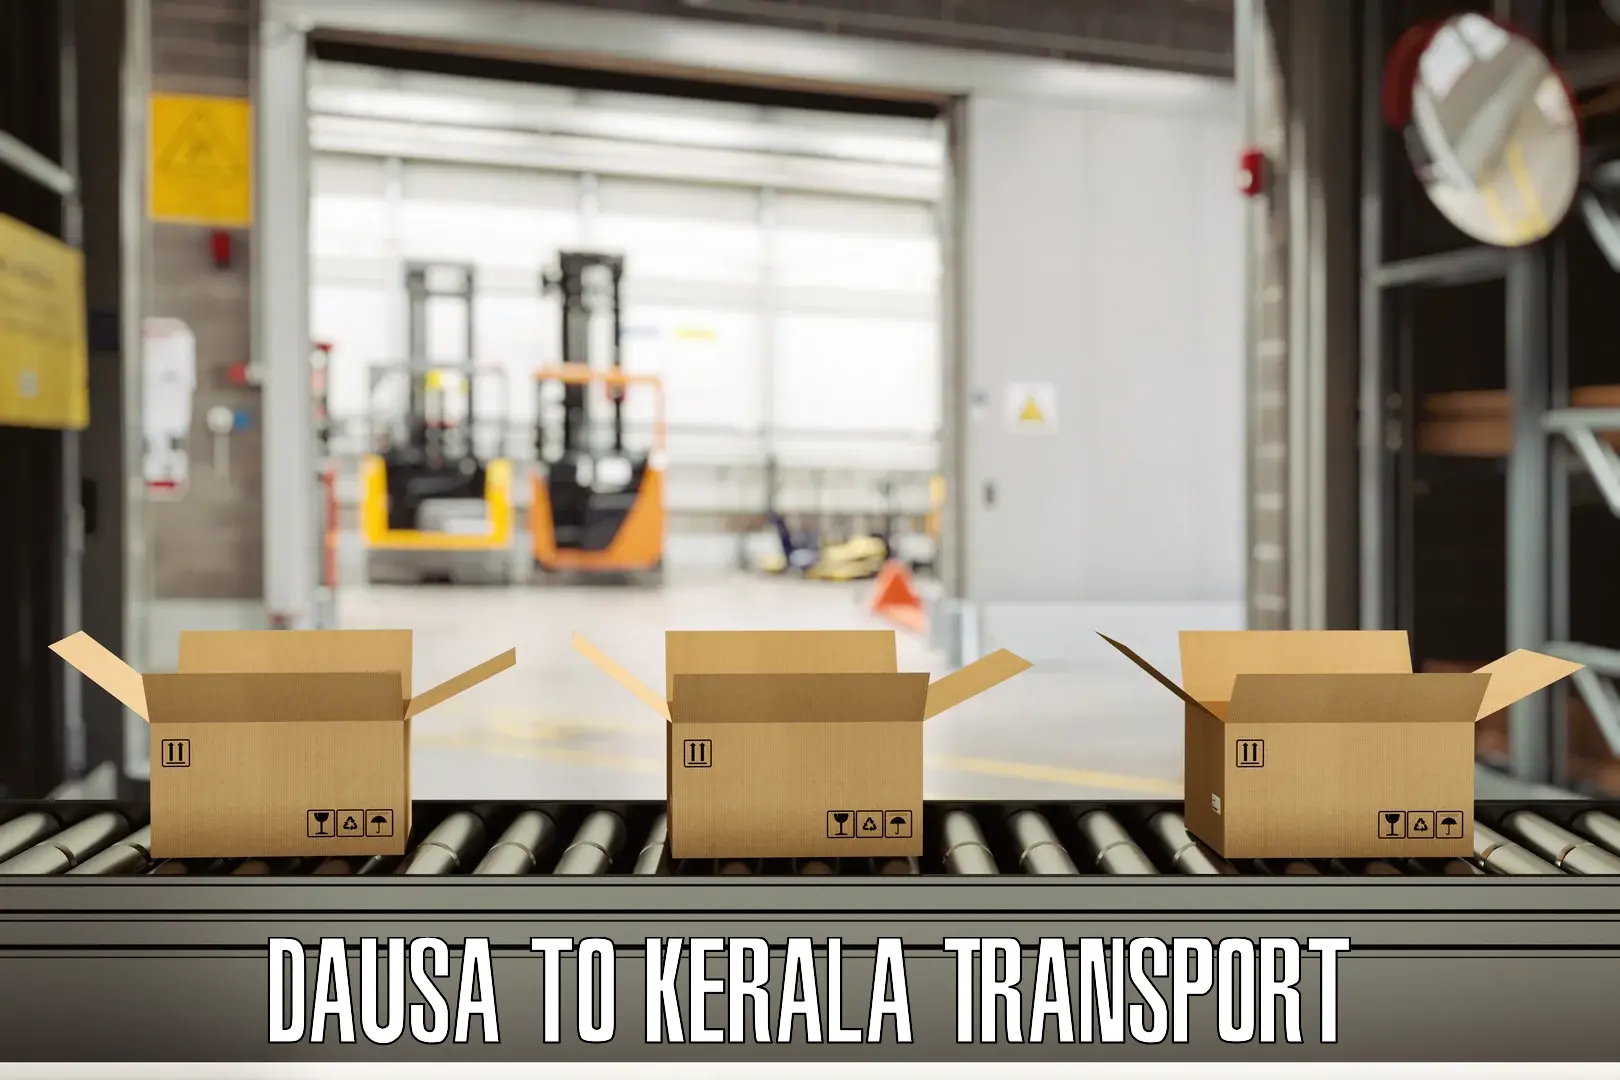 Transport in sharing Dausa to Thrissur